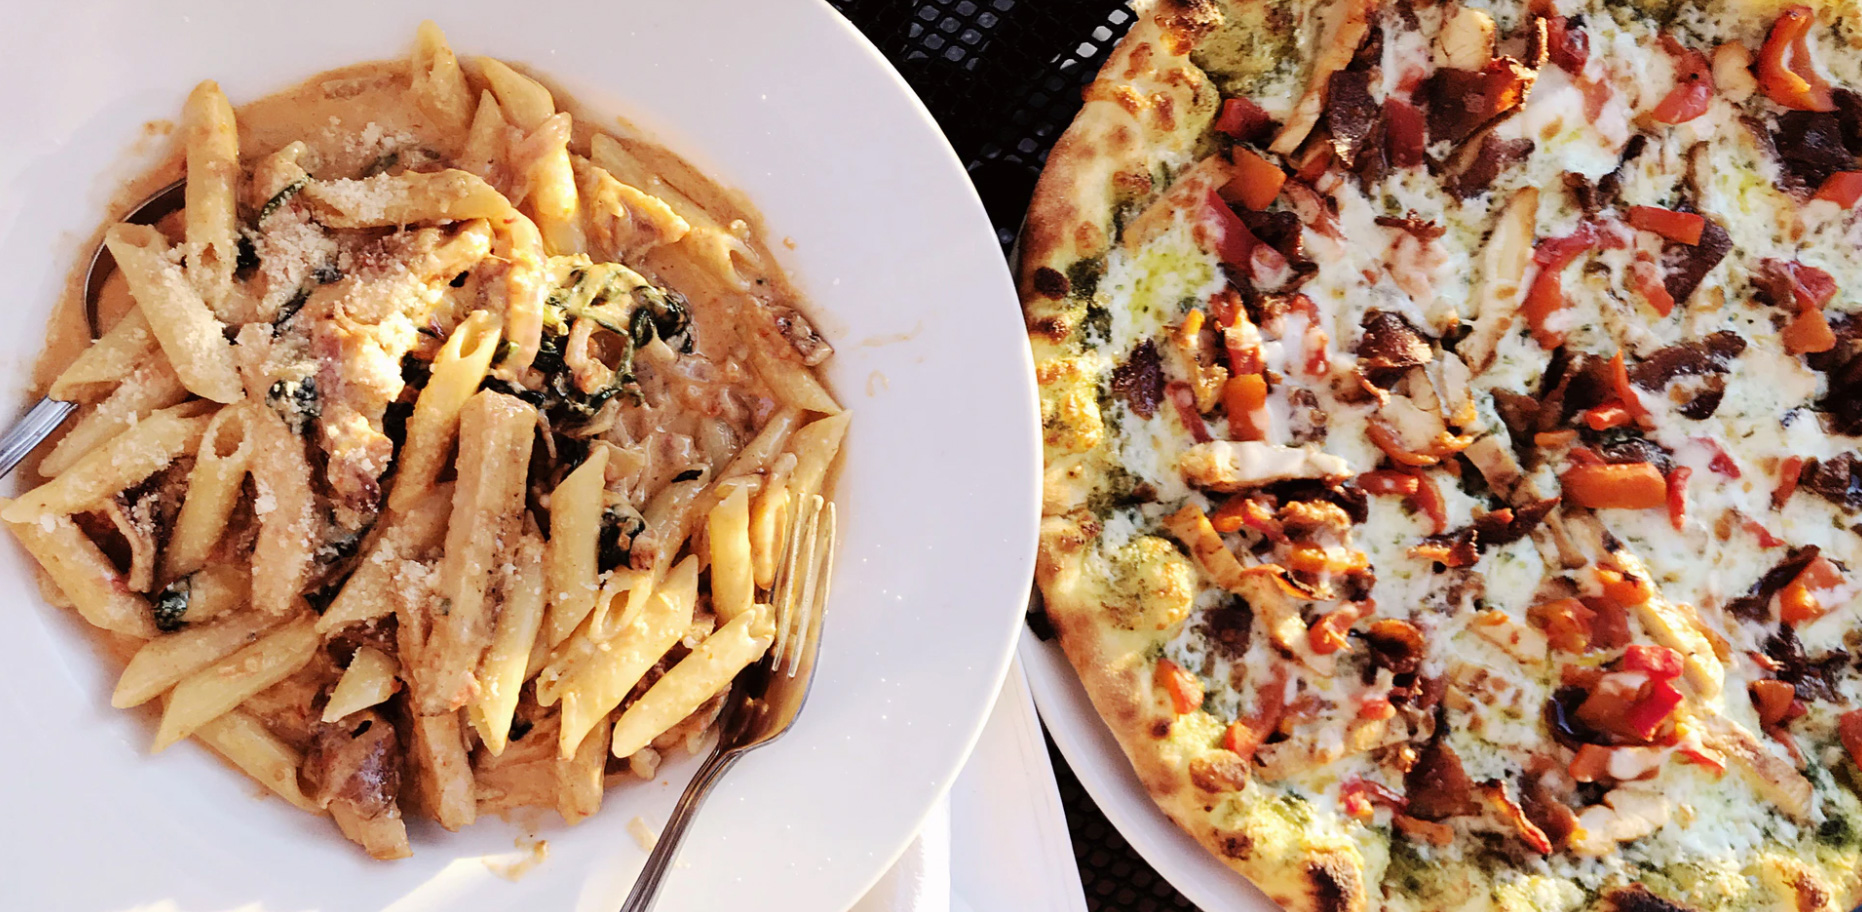 A plate of pasta and a pizza next to each other on a table. 